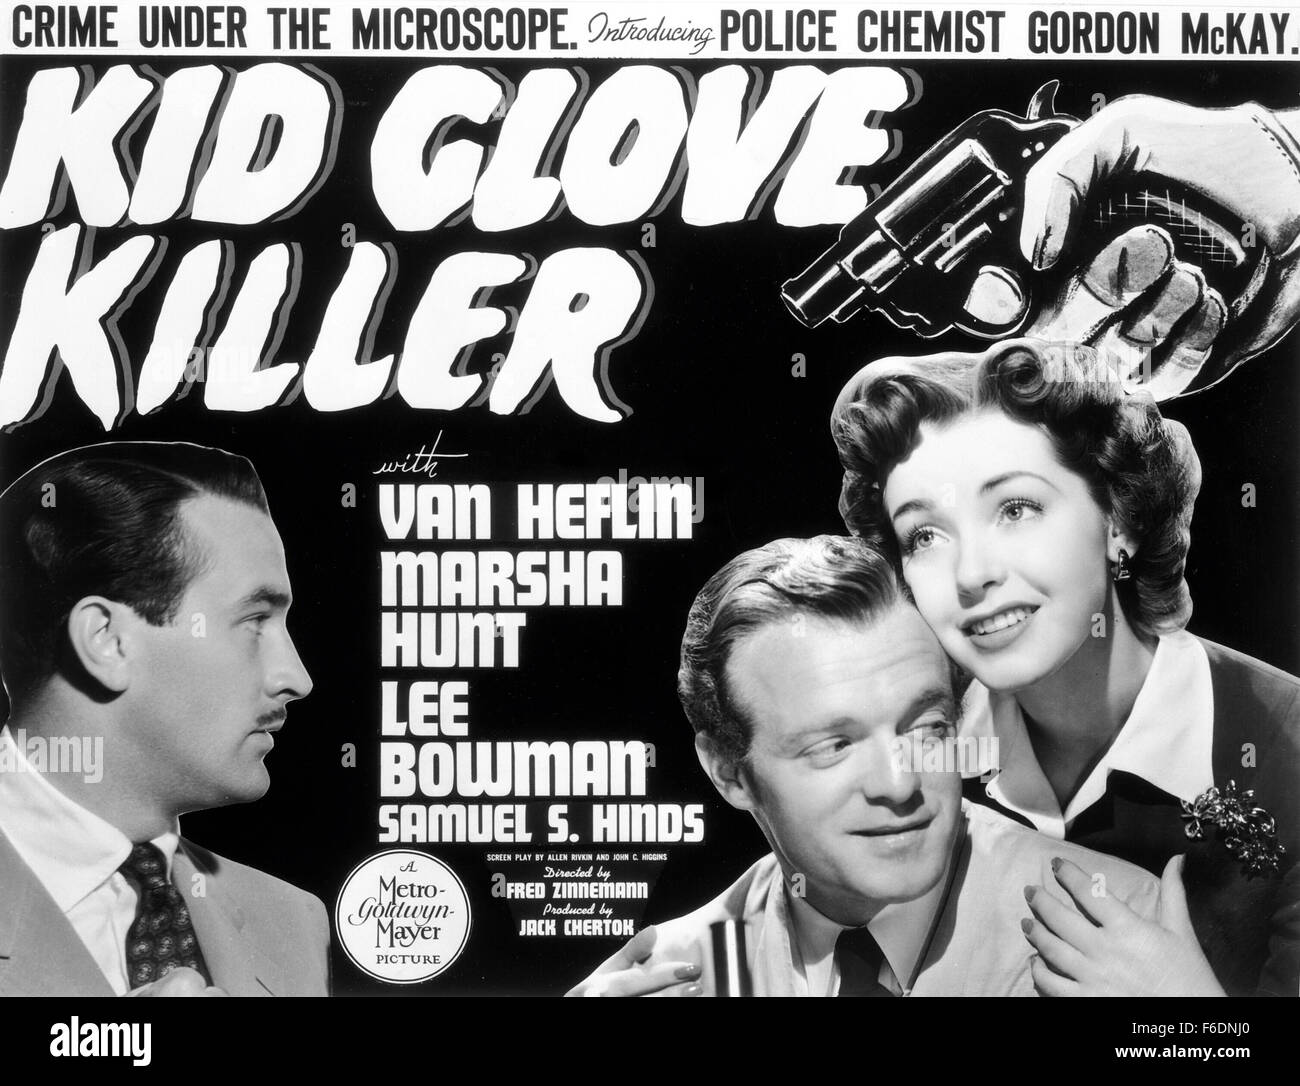 RELEASE DATE: April 17 1942. MOVIE TITLE: Kid Glove Killer. STUDIO:  Metro-Goldwyn-Mayer (MGM). PLOT: First feature film from director Fred  Zinneman is a snappy littleB feature that features Van Heflin as the